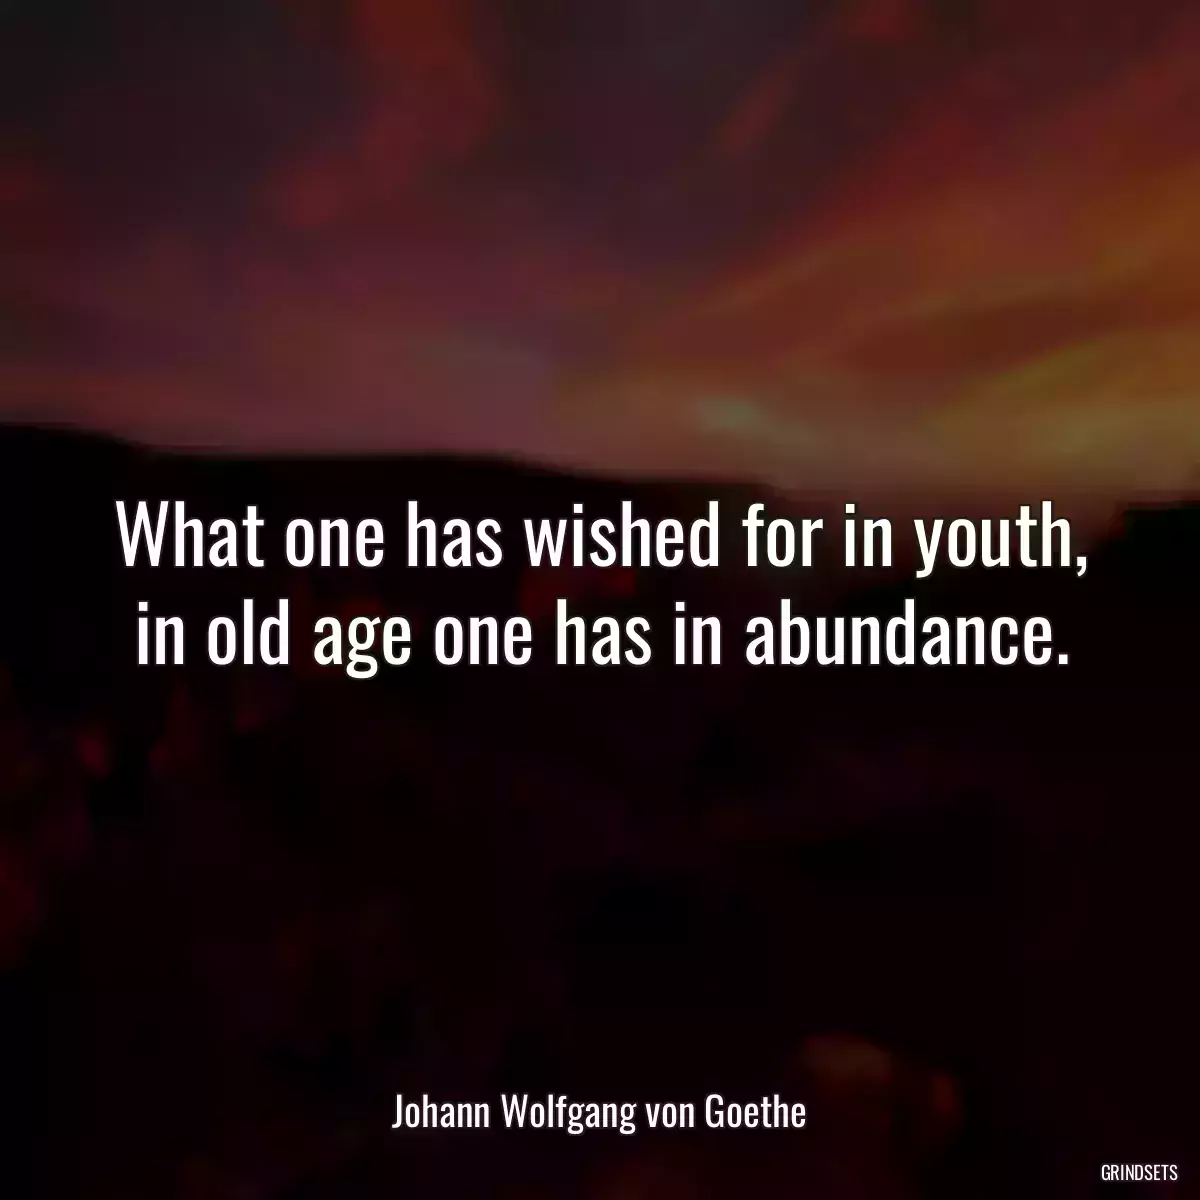 What one has wished for in youth, in old age one has in abundance.